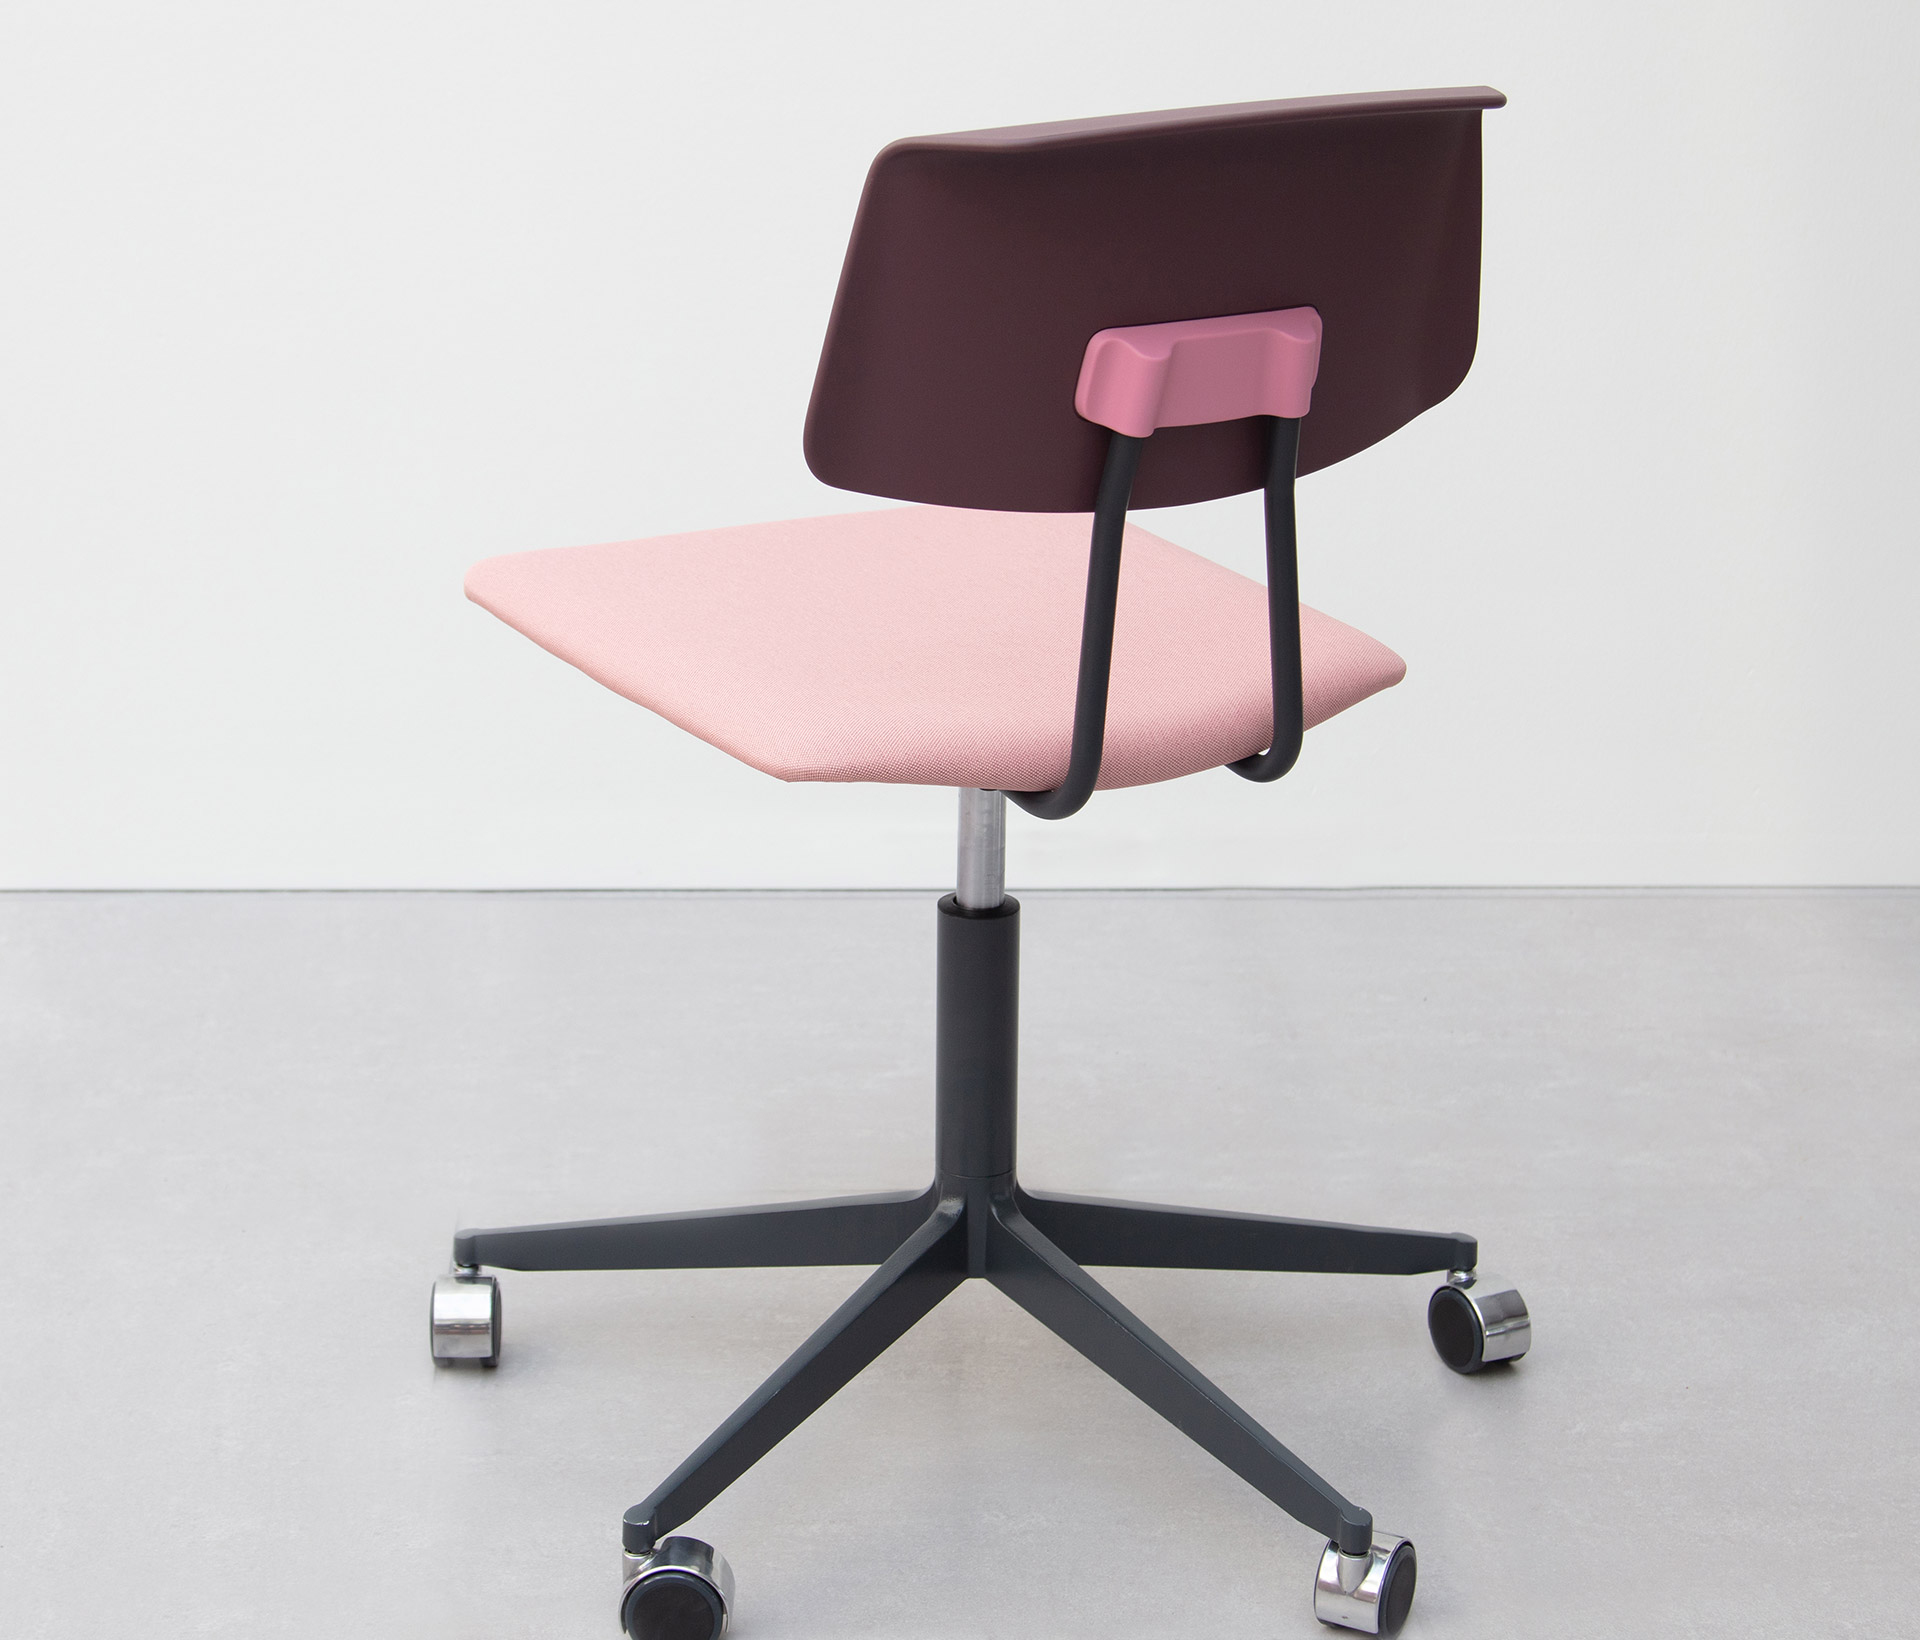 A pink office chair with a black seat and wheels.